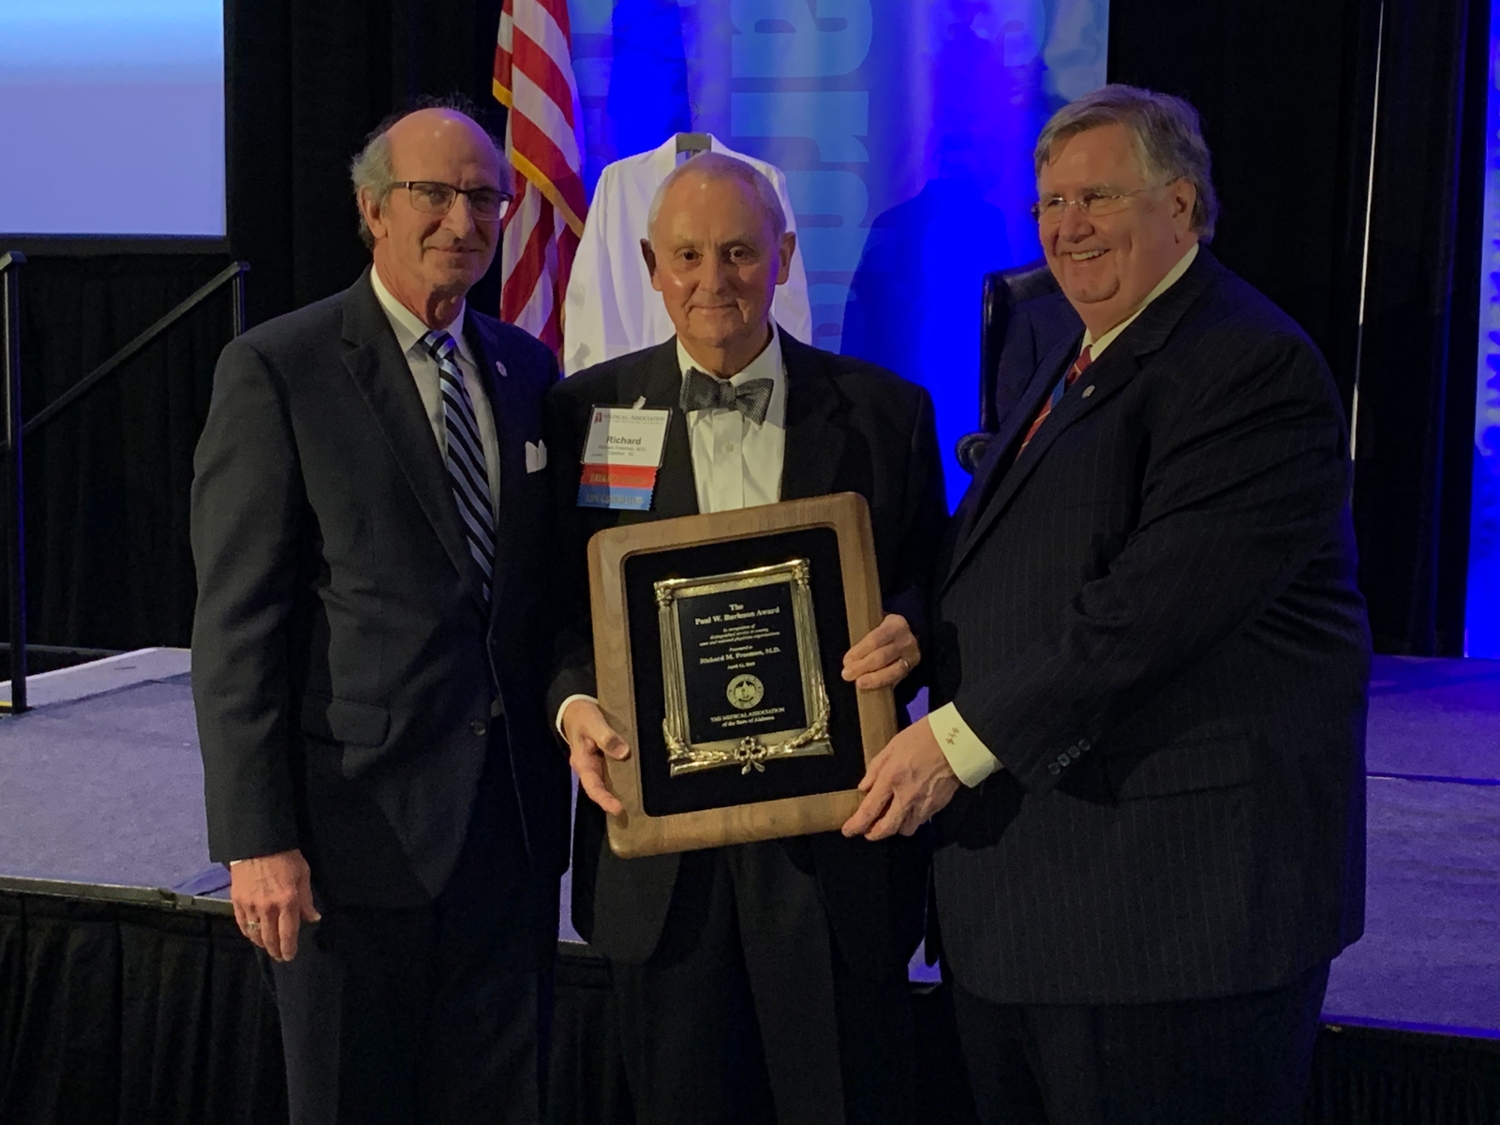 Richard M. Freeman, M.D., pictured in the middle, receives the prestigious 2019 Paul W. Burleson Award from the Medical Association of the State of Alabama. 